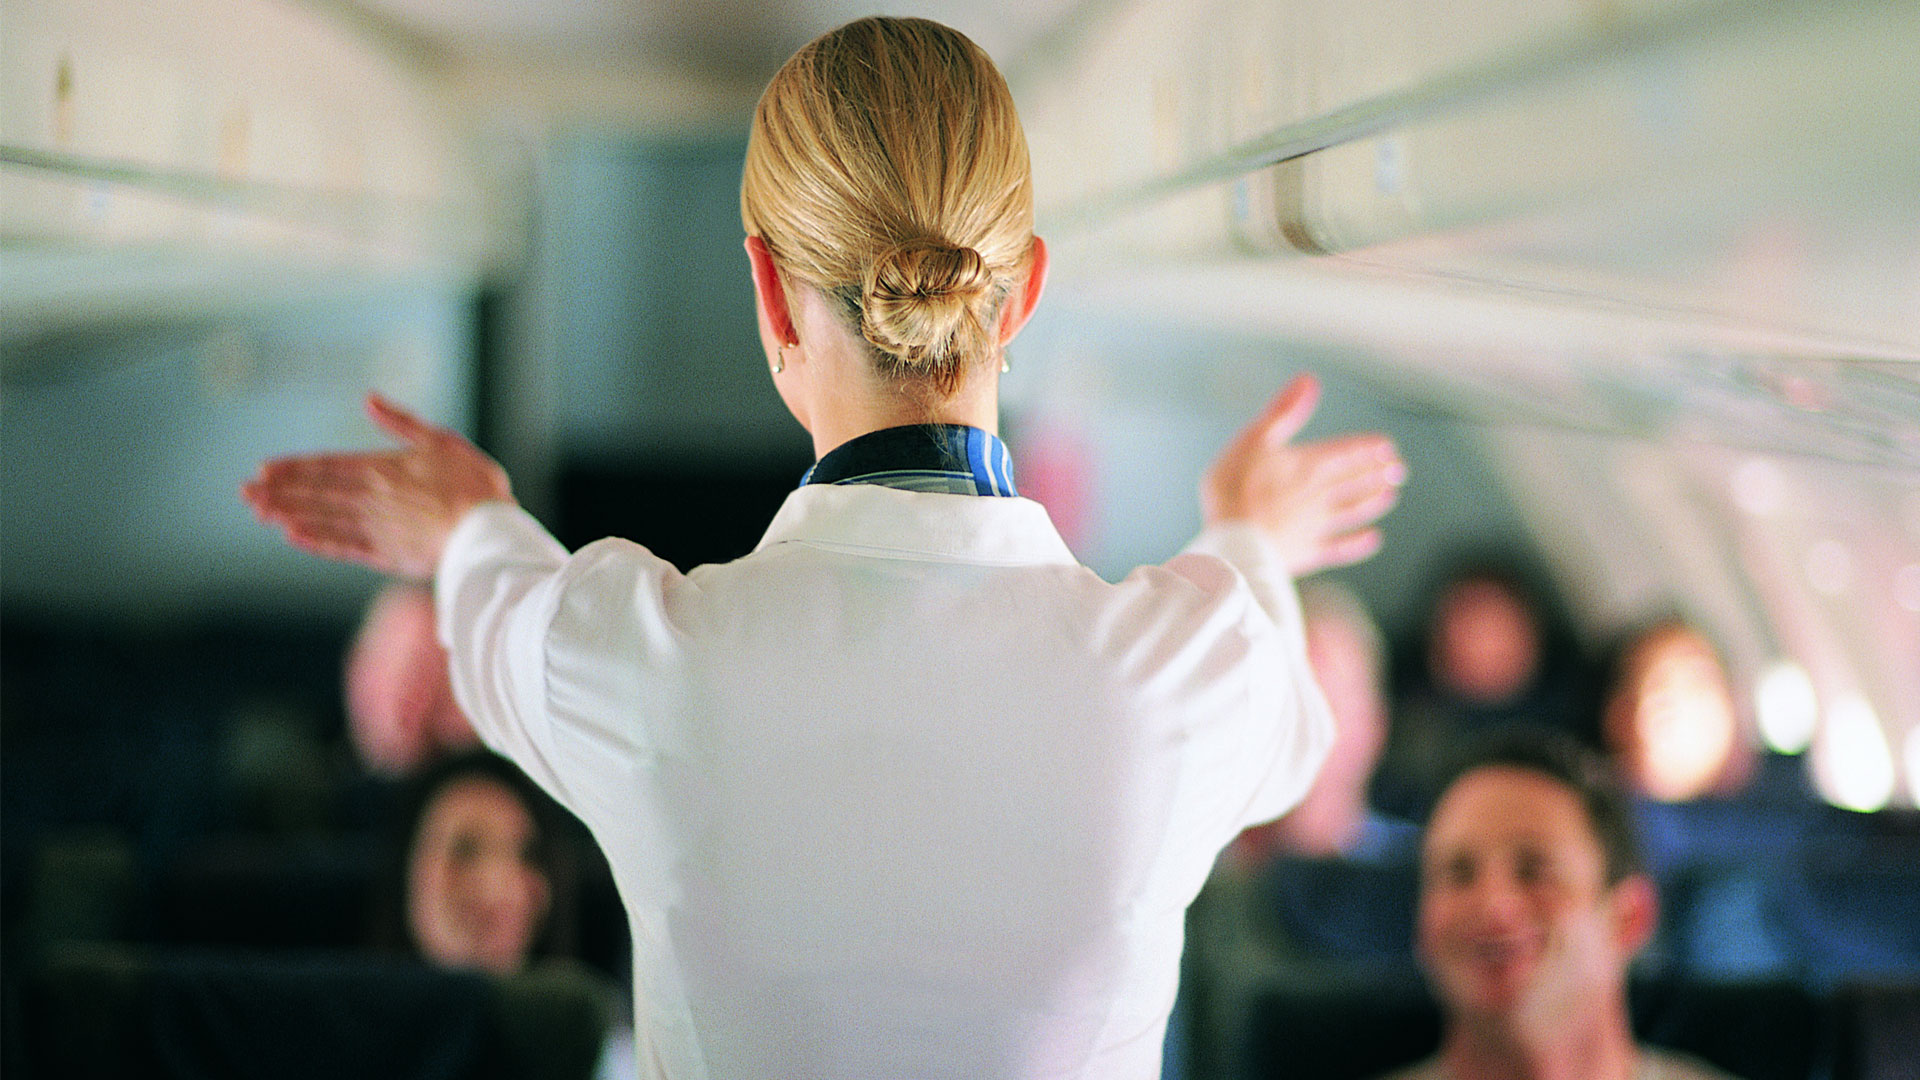 Cabin crew staff member giving safety instructions before take off.